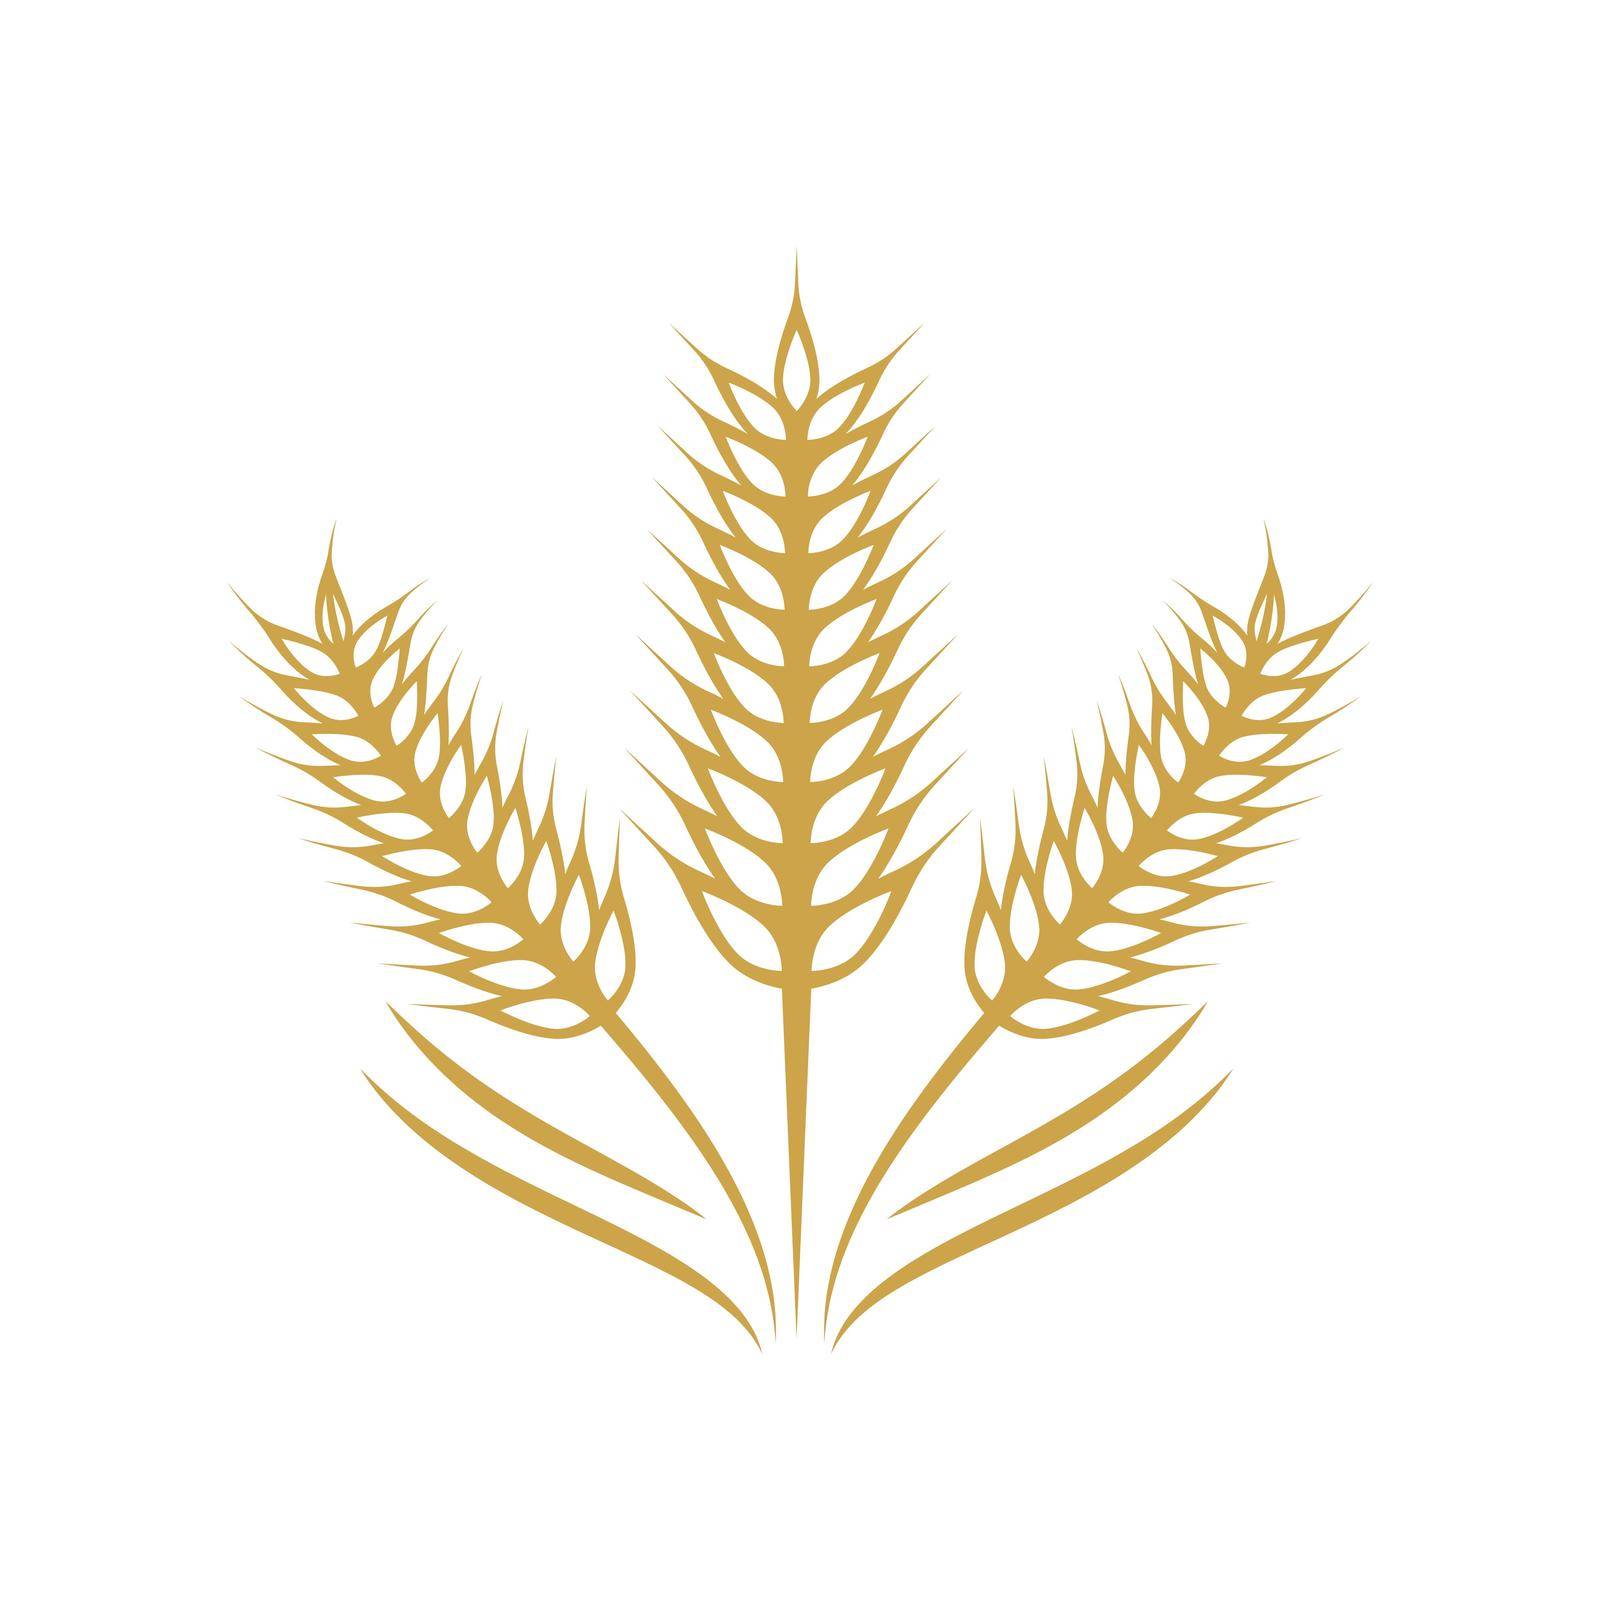 Wheat illustration design by awk